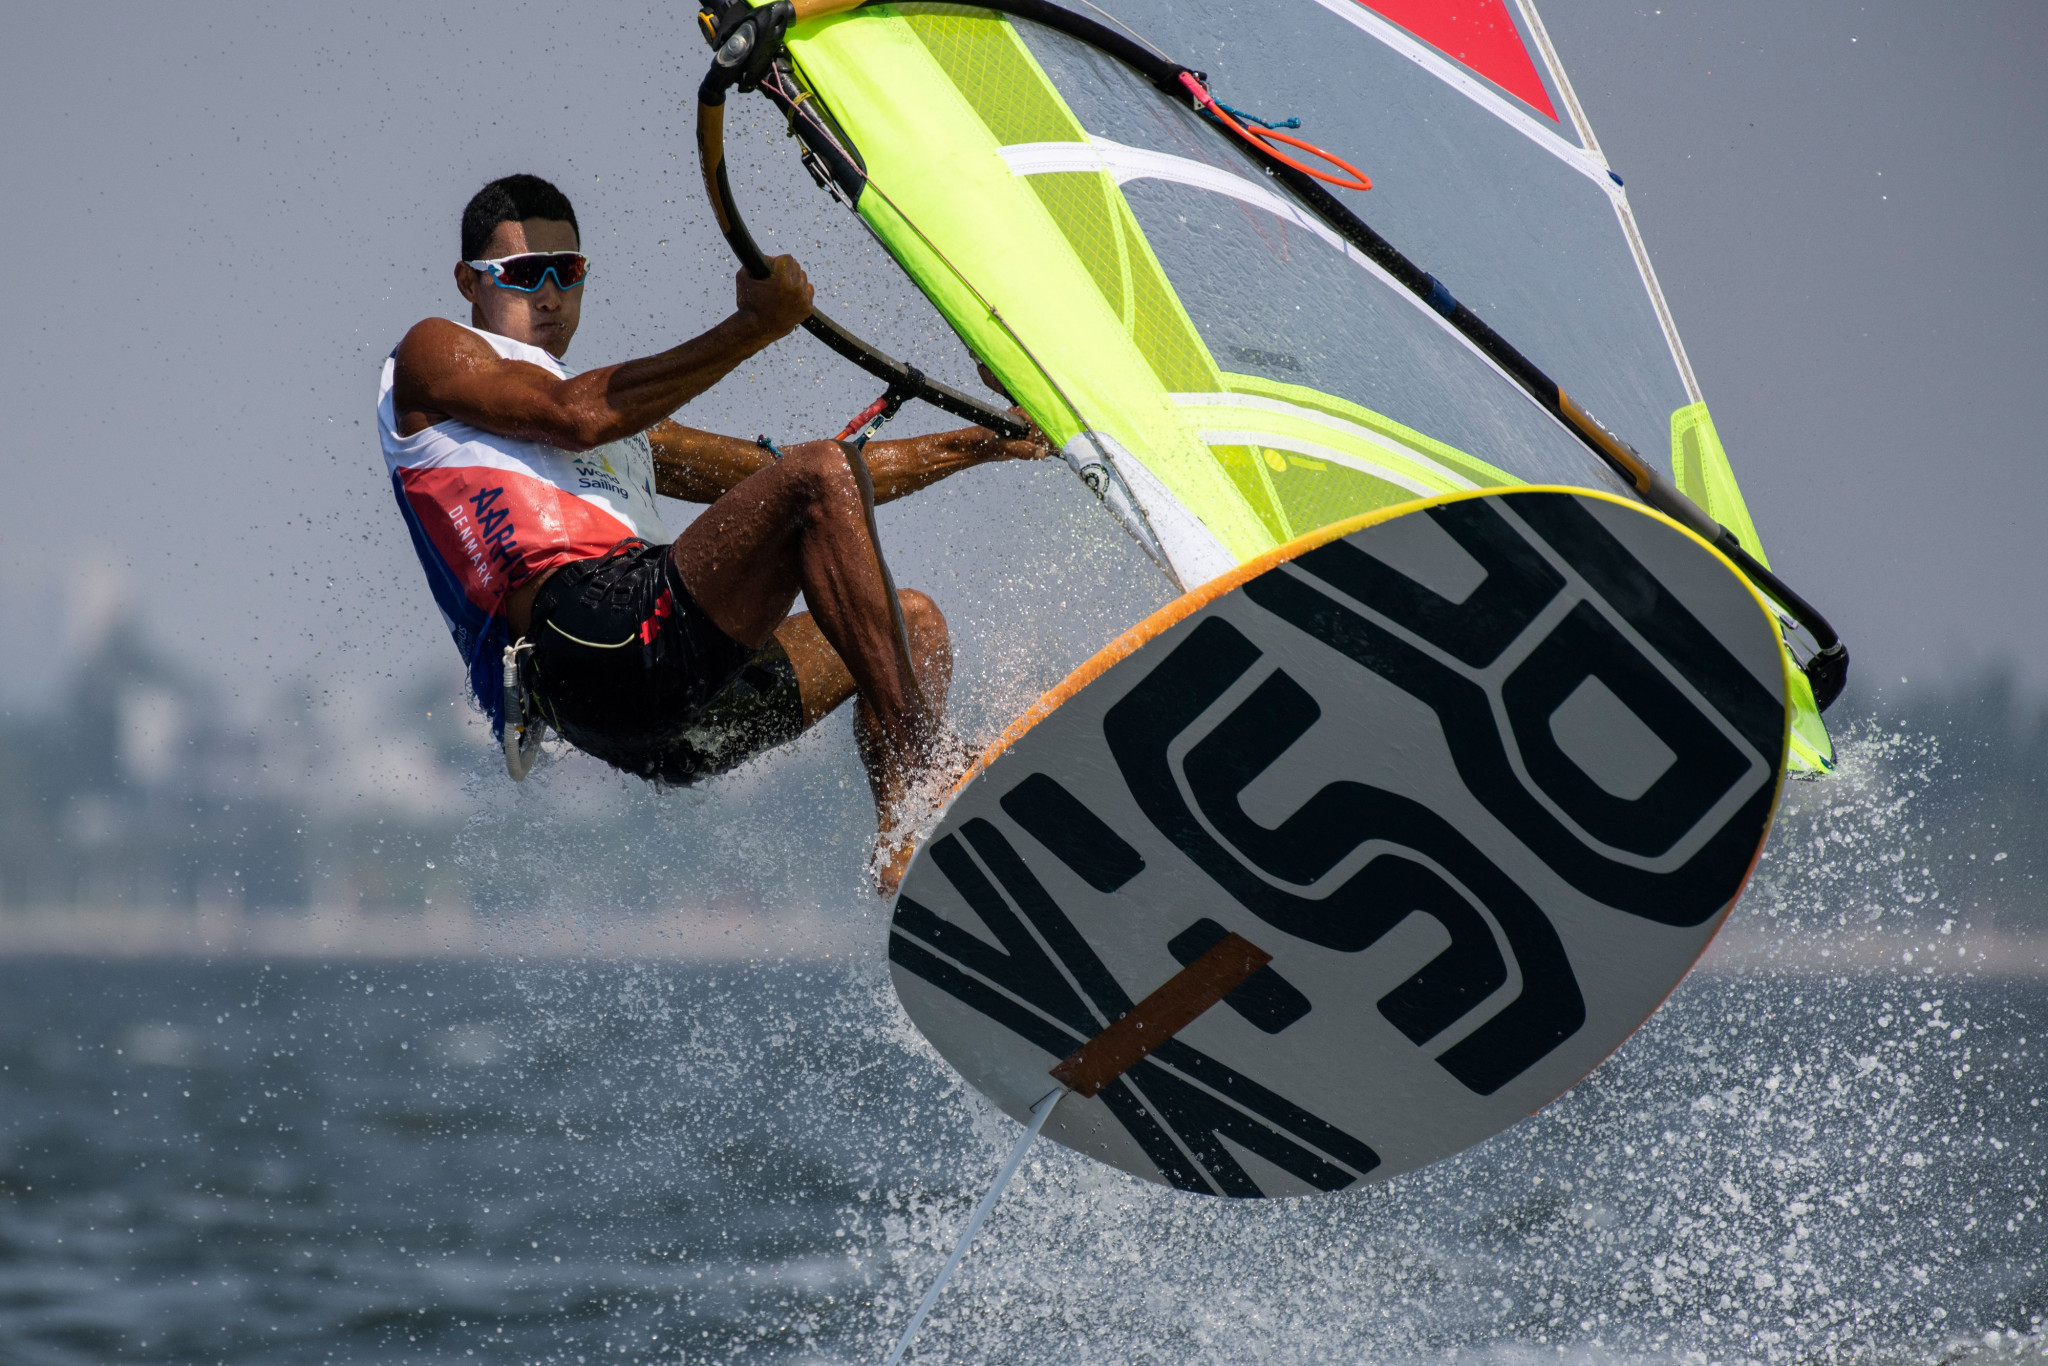 All 10 sailing and windsurfing events concluded today, including the men's RS:X, which was won by China's Kun Bi ©Getty Images